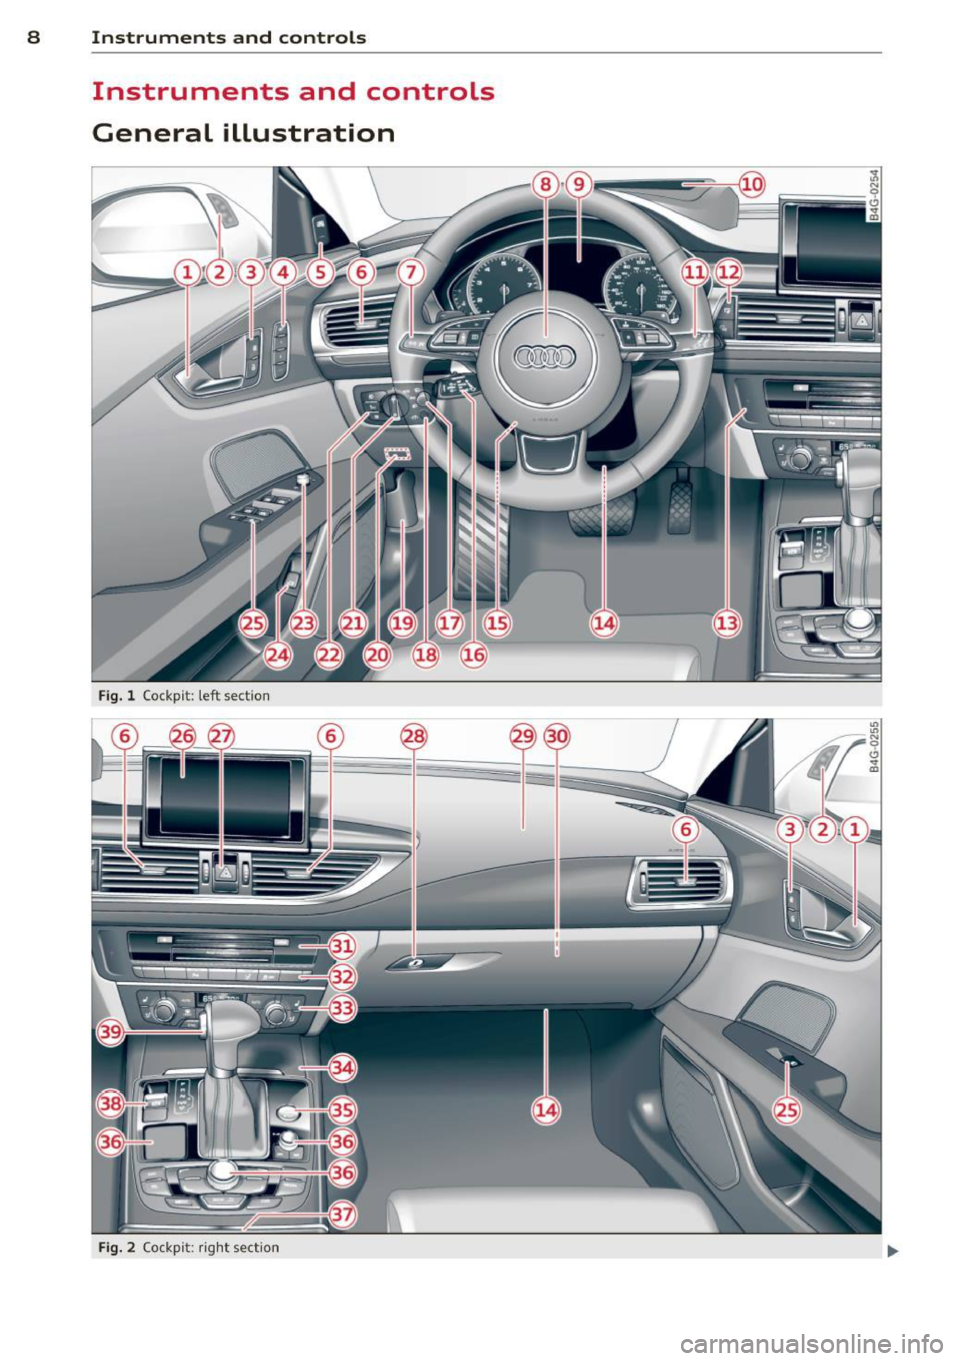 AUDI S7 2013  Owners Manual 8  Instruments and controls 
Instruments  and  controls 
General  illustration 
Fig. l Cockp it:  left  sect io n 
Fig. 2 Co ck pi t: ri ght  sect io n  